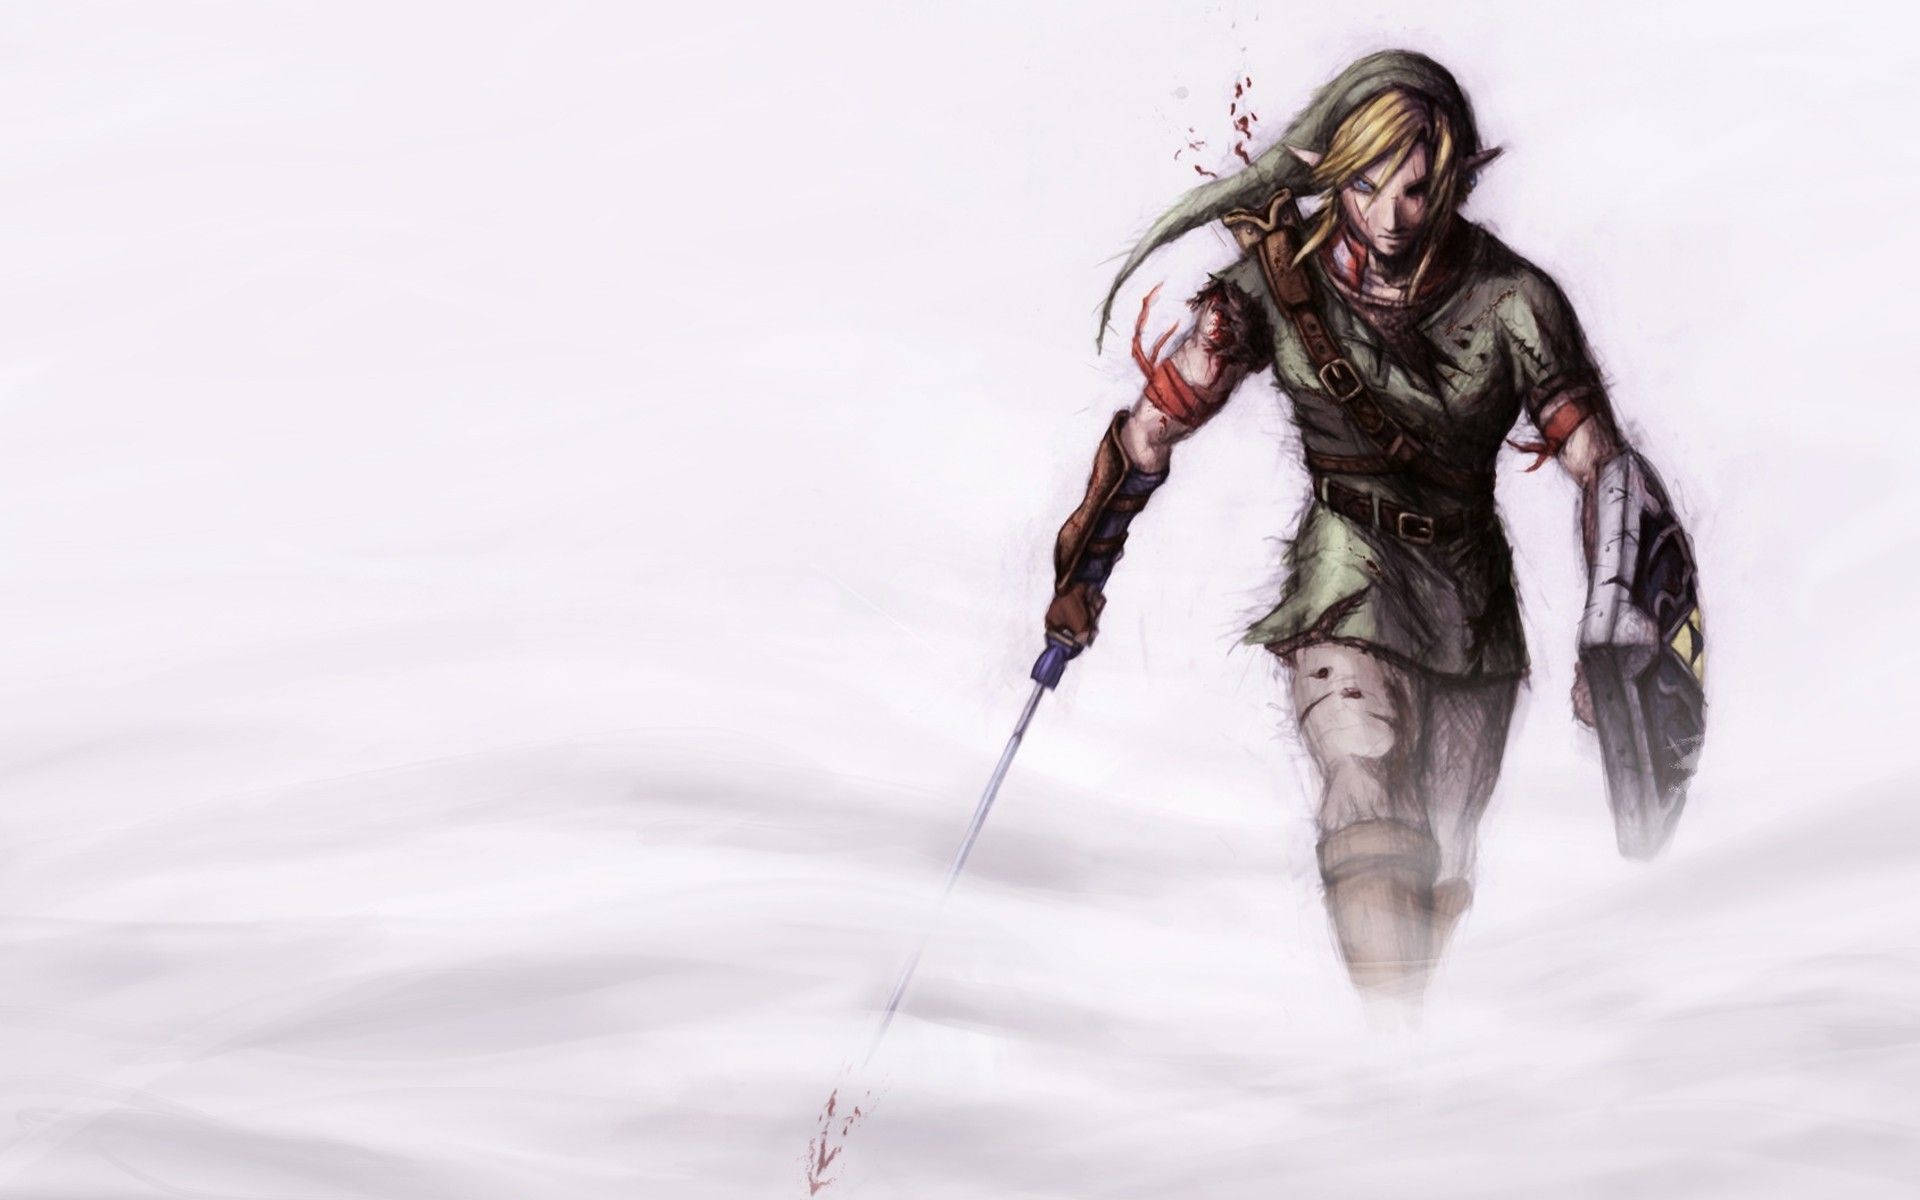 Link ready for adventure Wallpaper